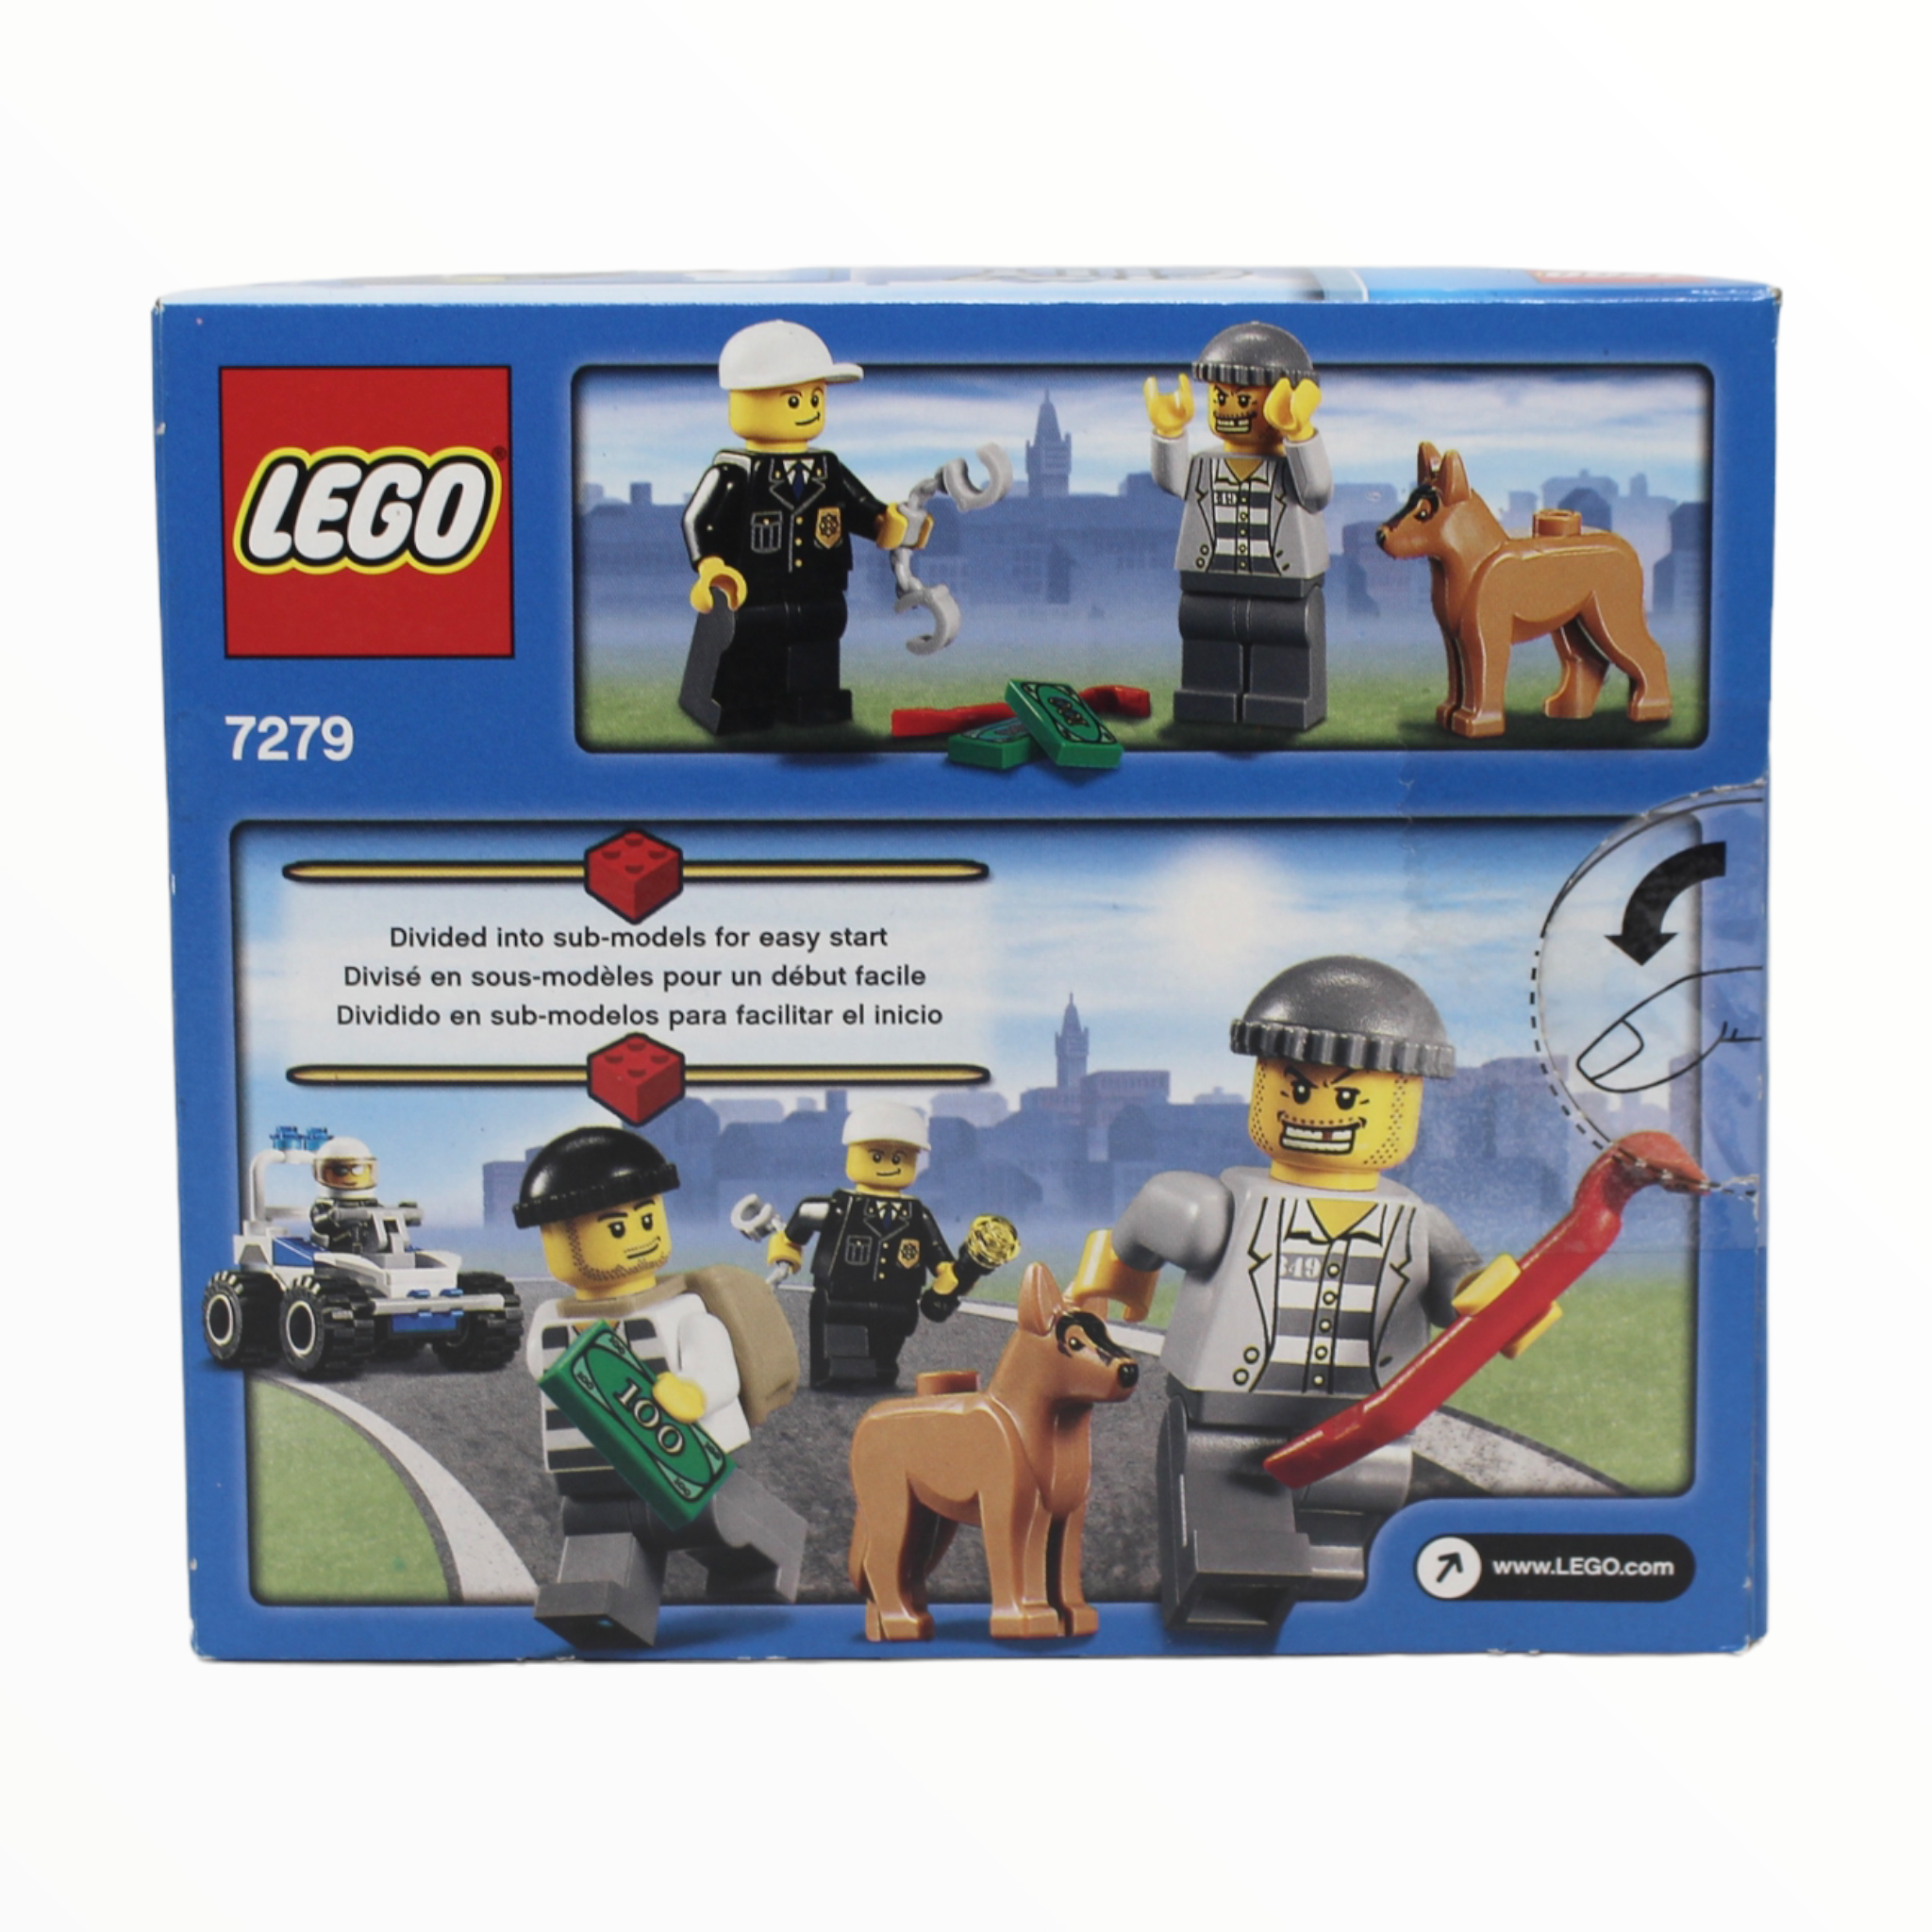 Certified Used Set 7279 City Police Minifigure Collection